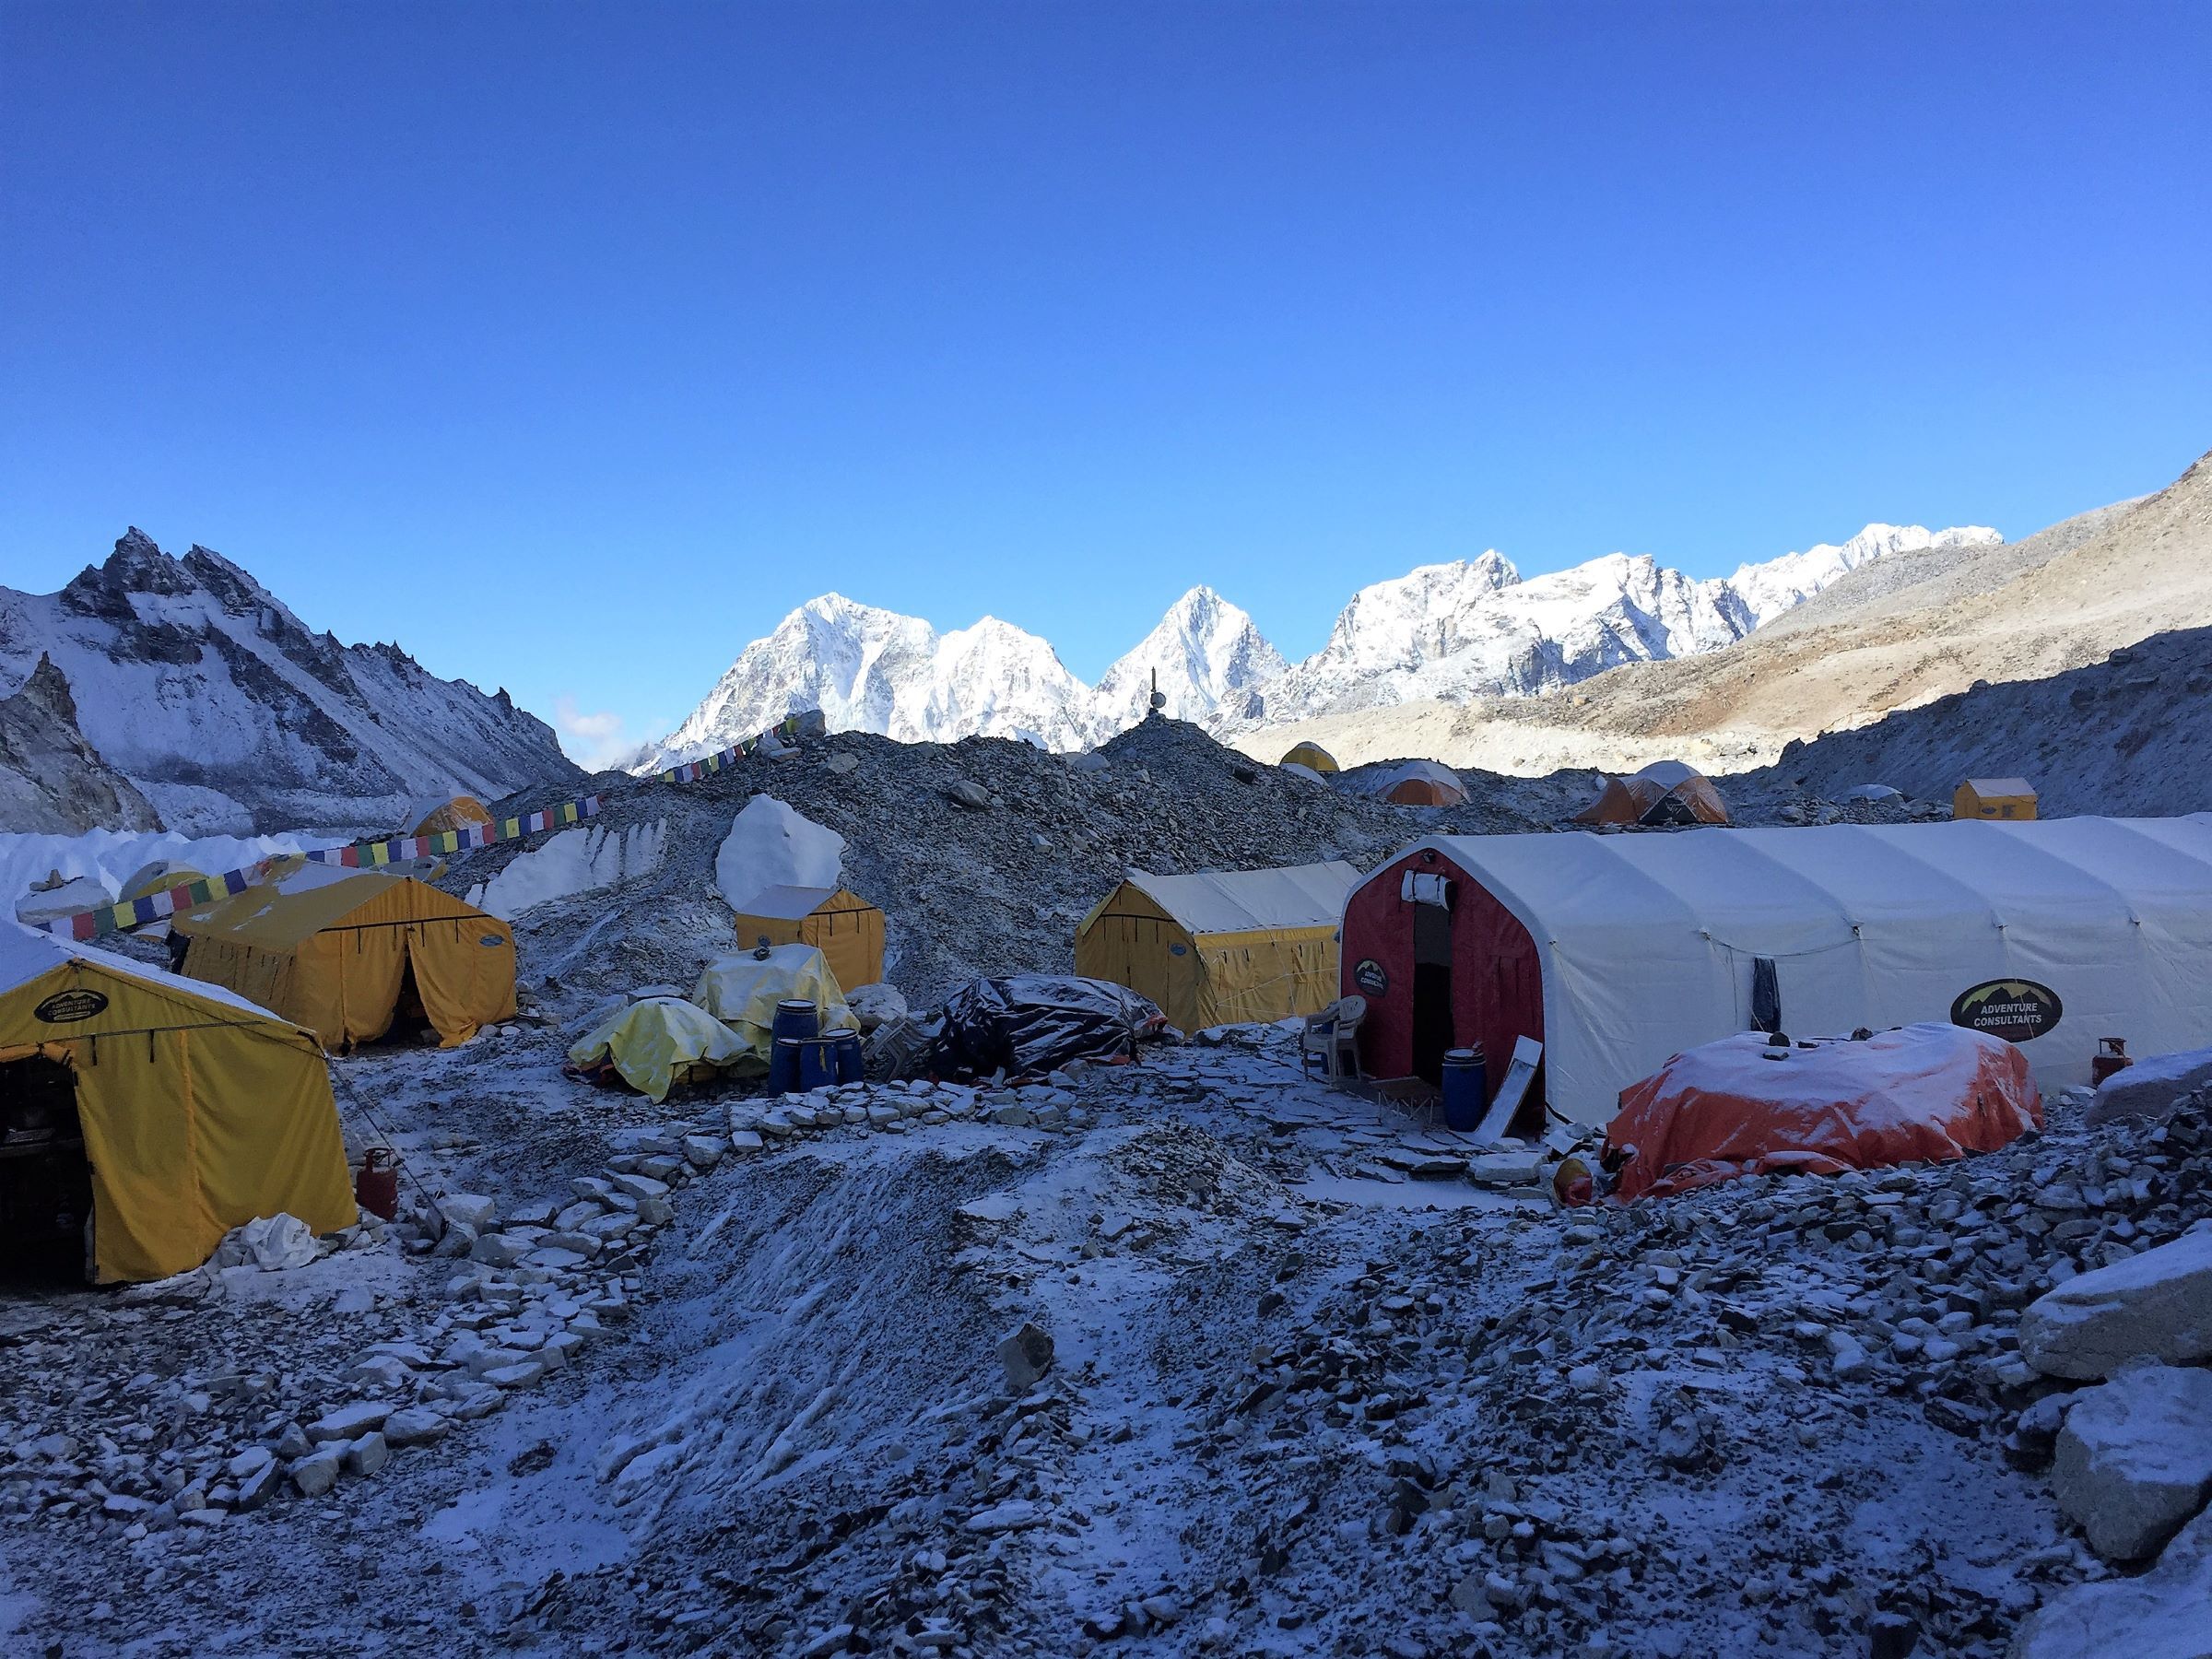 The Adventure Consultants Everest Basecamp with the spectacular peaks to the south including Cholatse catching the sun first thing in the morning.